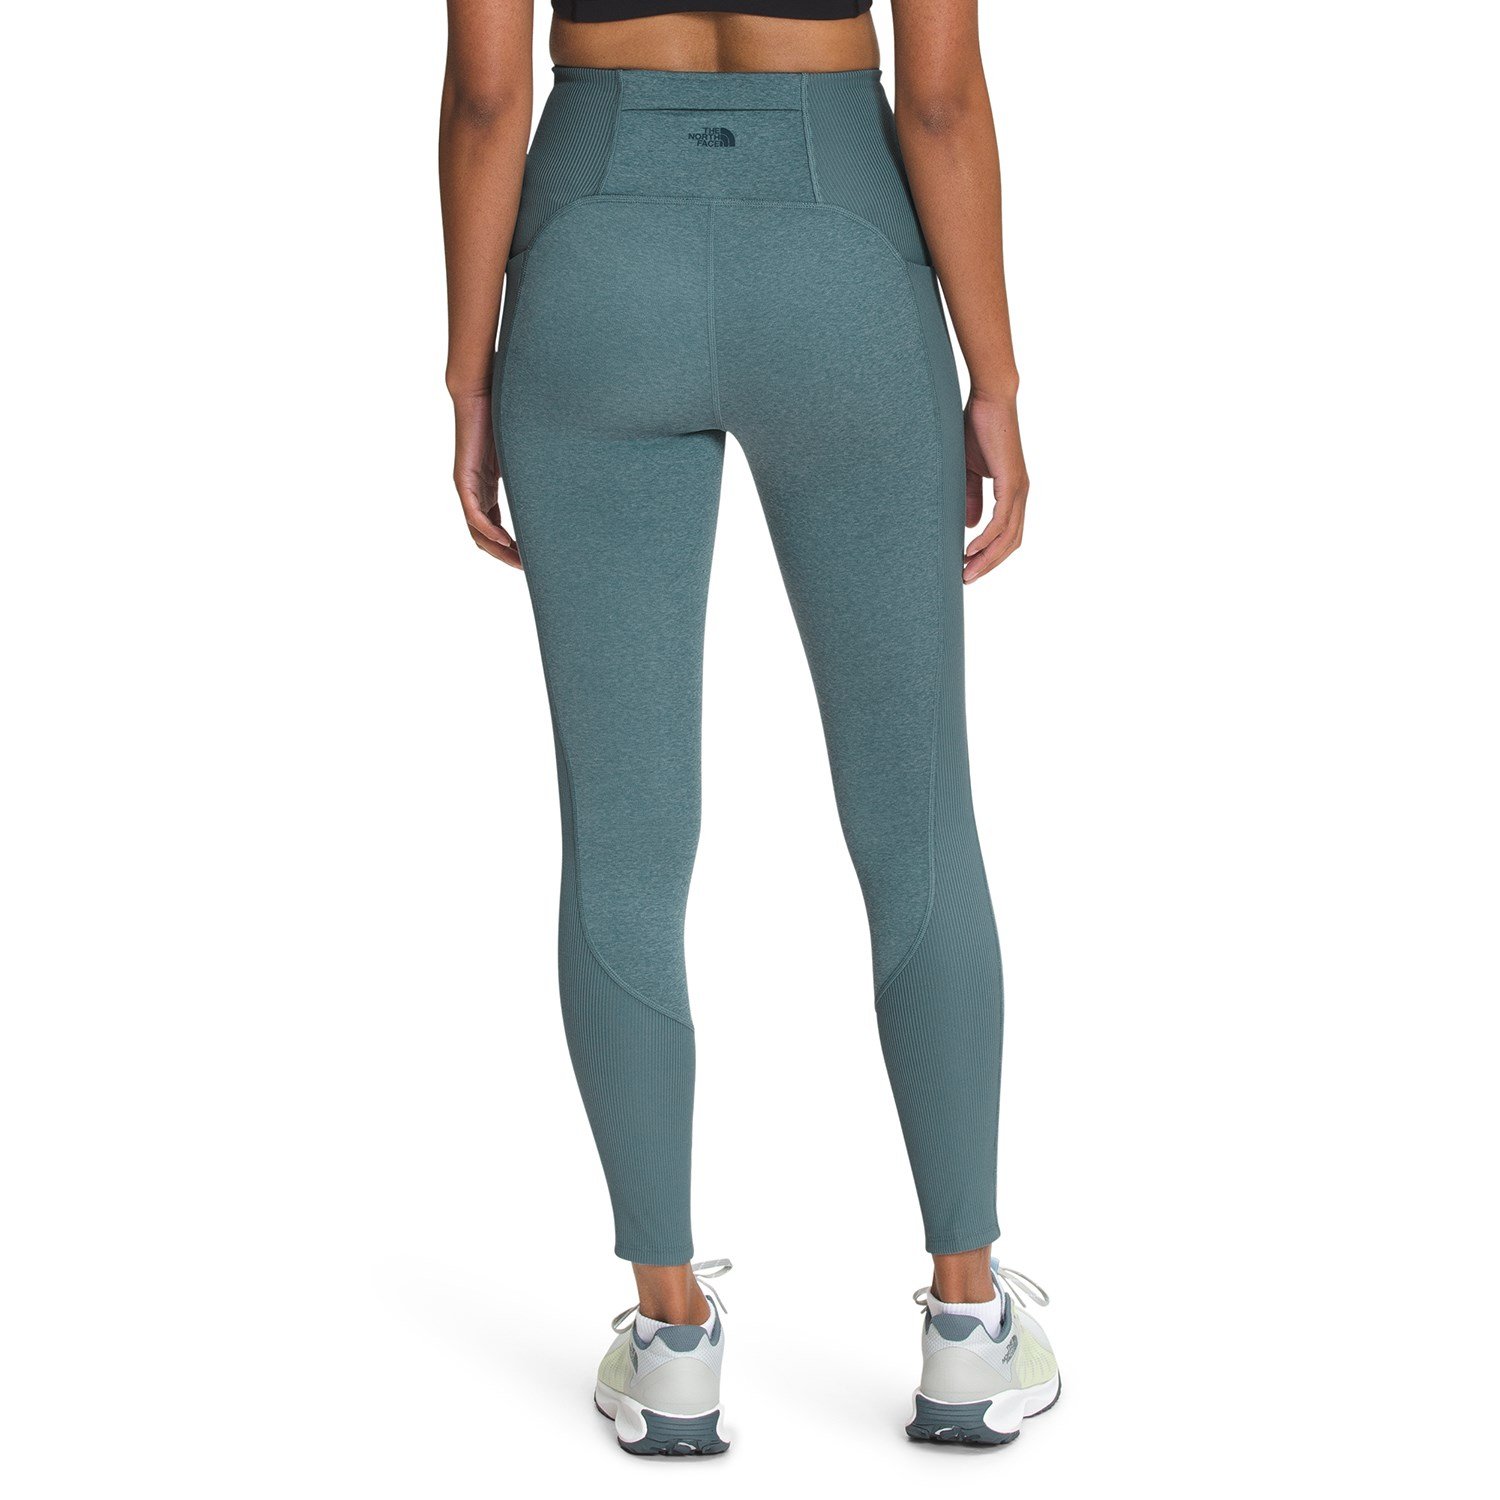 The North Face EA Dune Sky Duet Tights - Women's